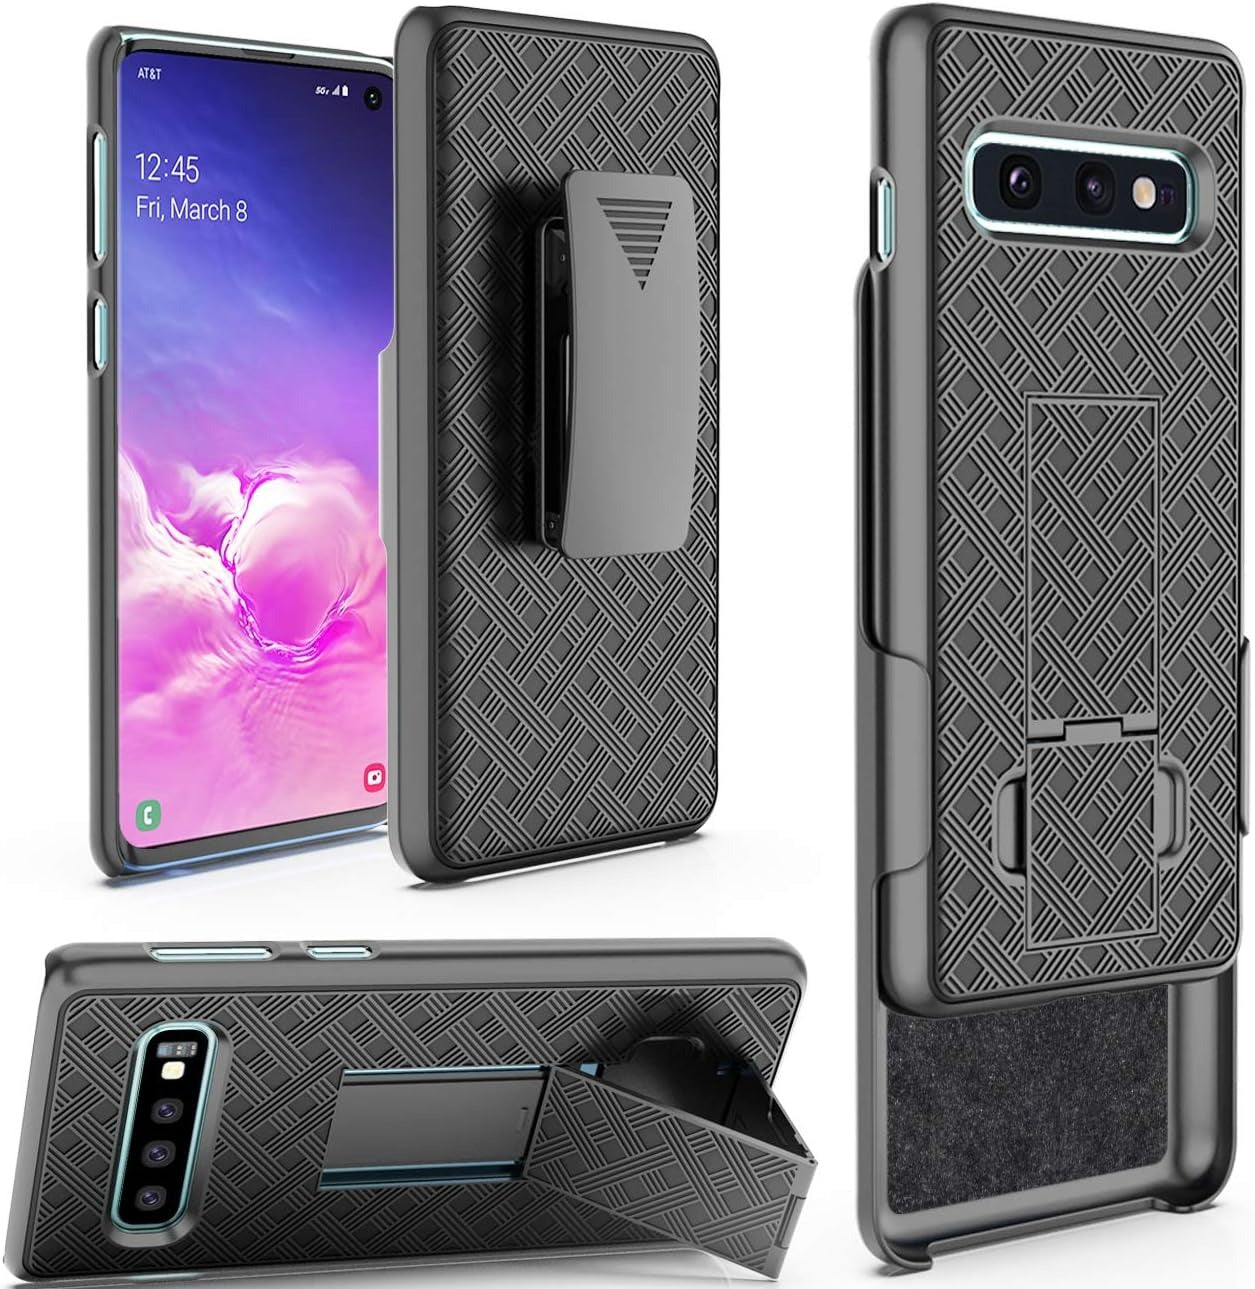 Verizon Shell Case and Holster for Samsung Galaxy S10e - Black (New)